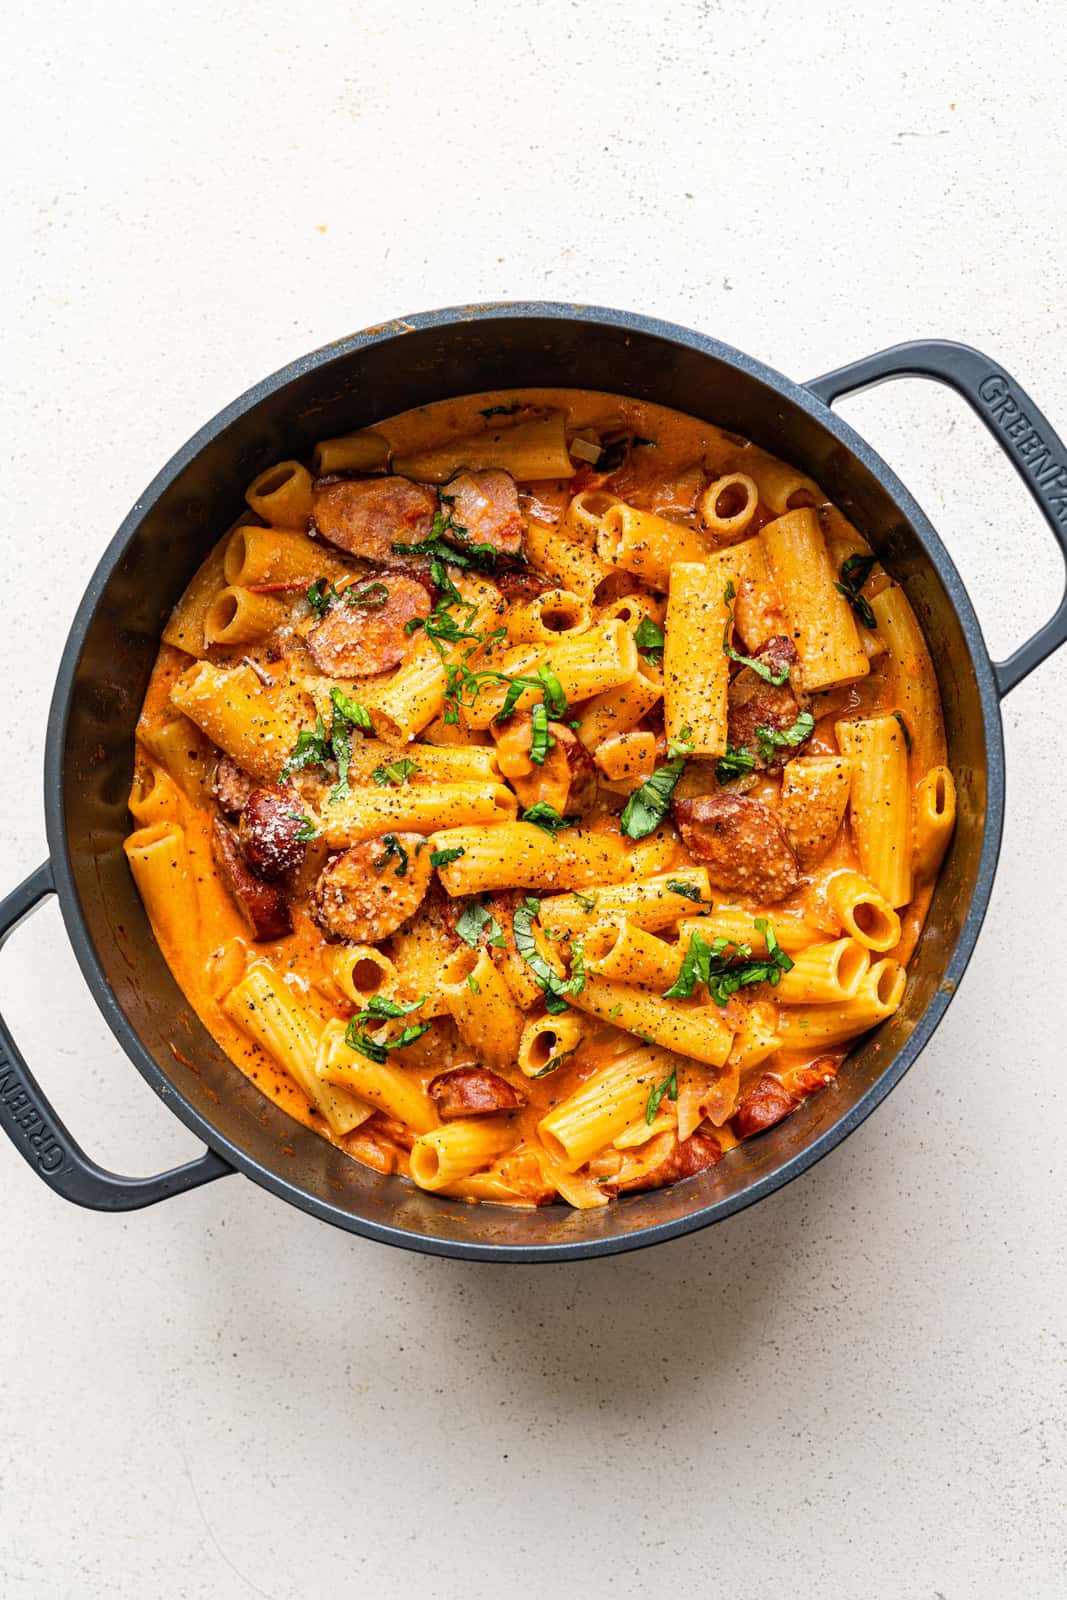 Pot of spicy sausage pasta in tomato and mascarpone sauce garnished with fresh chopped basil